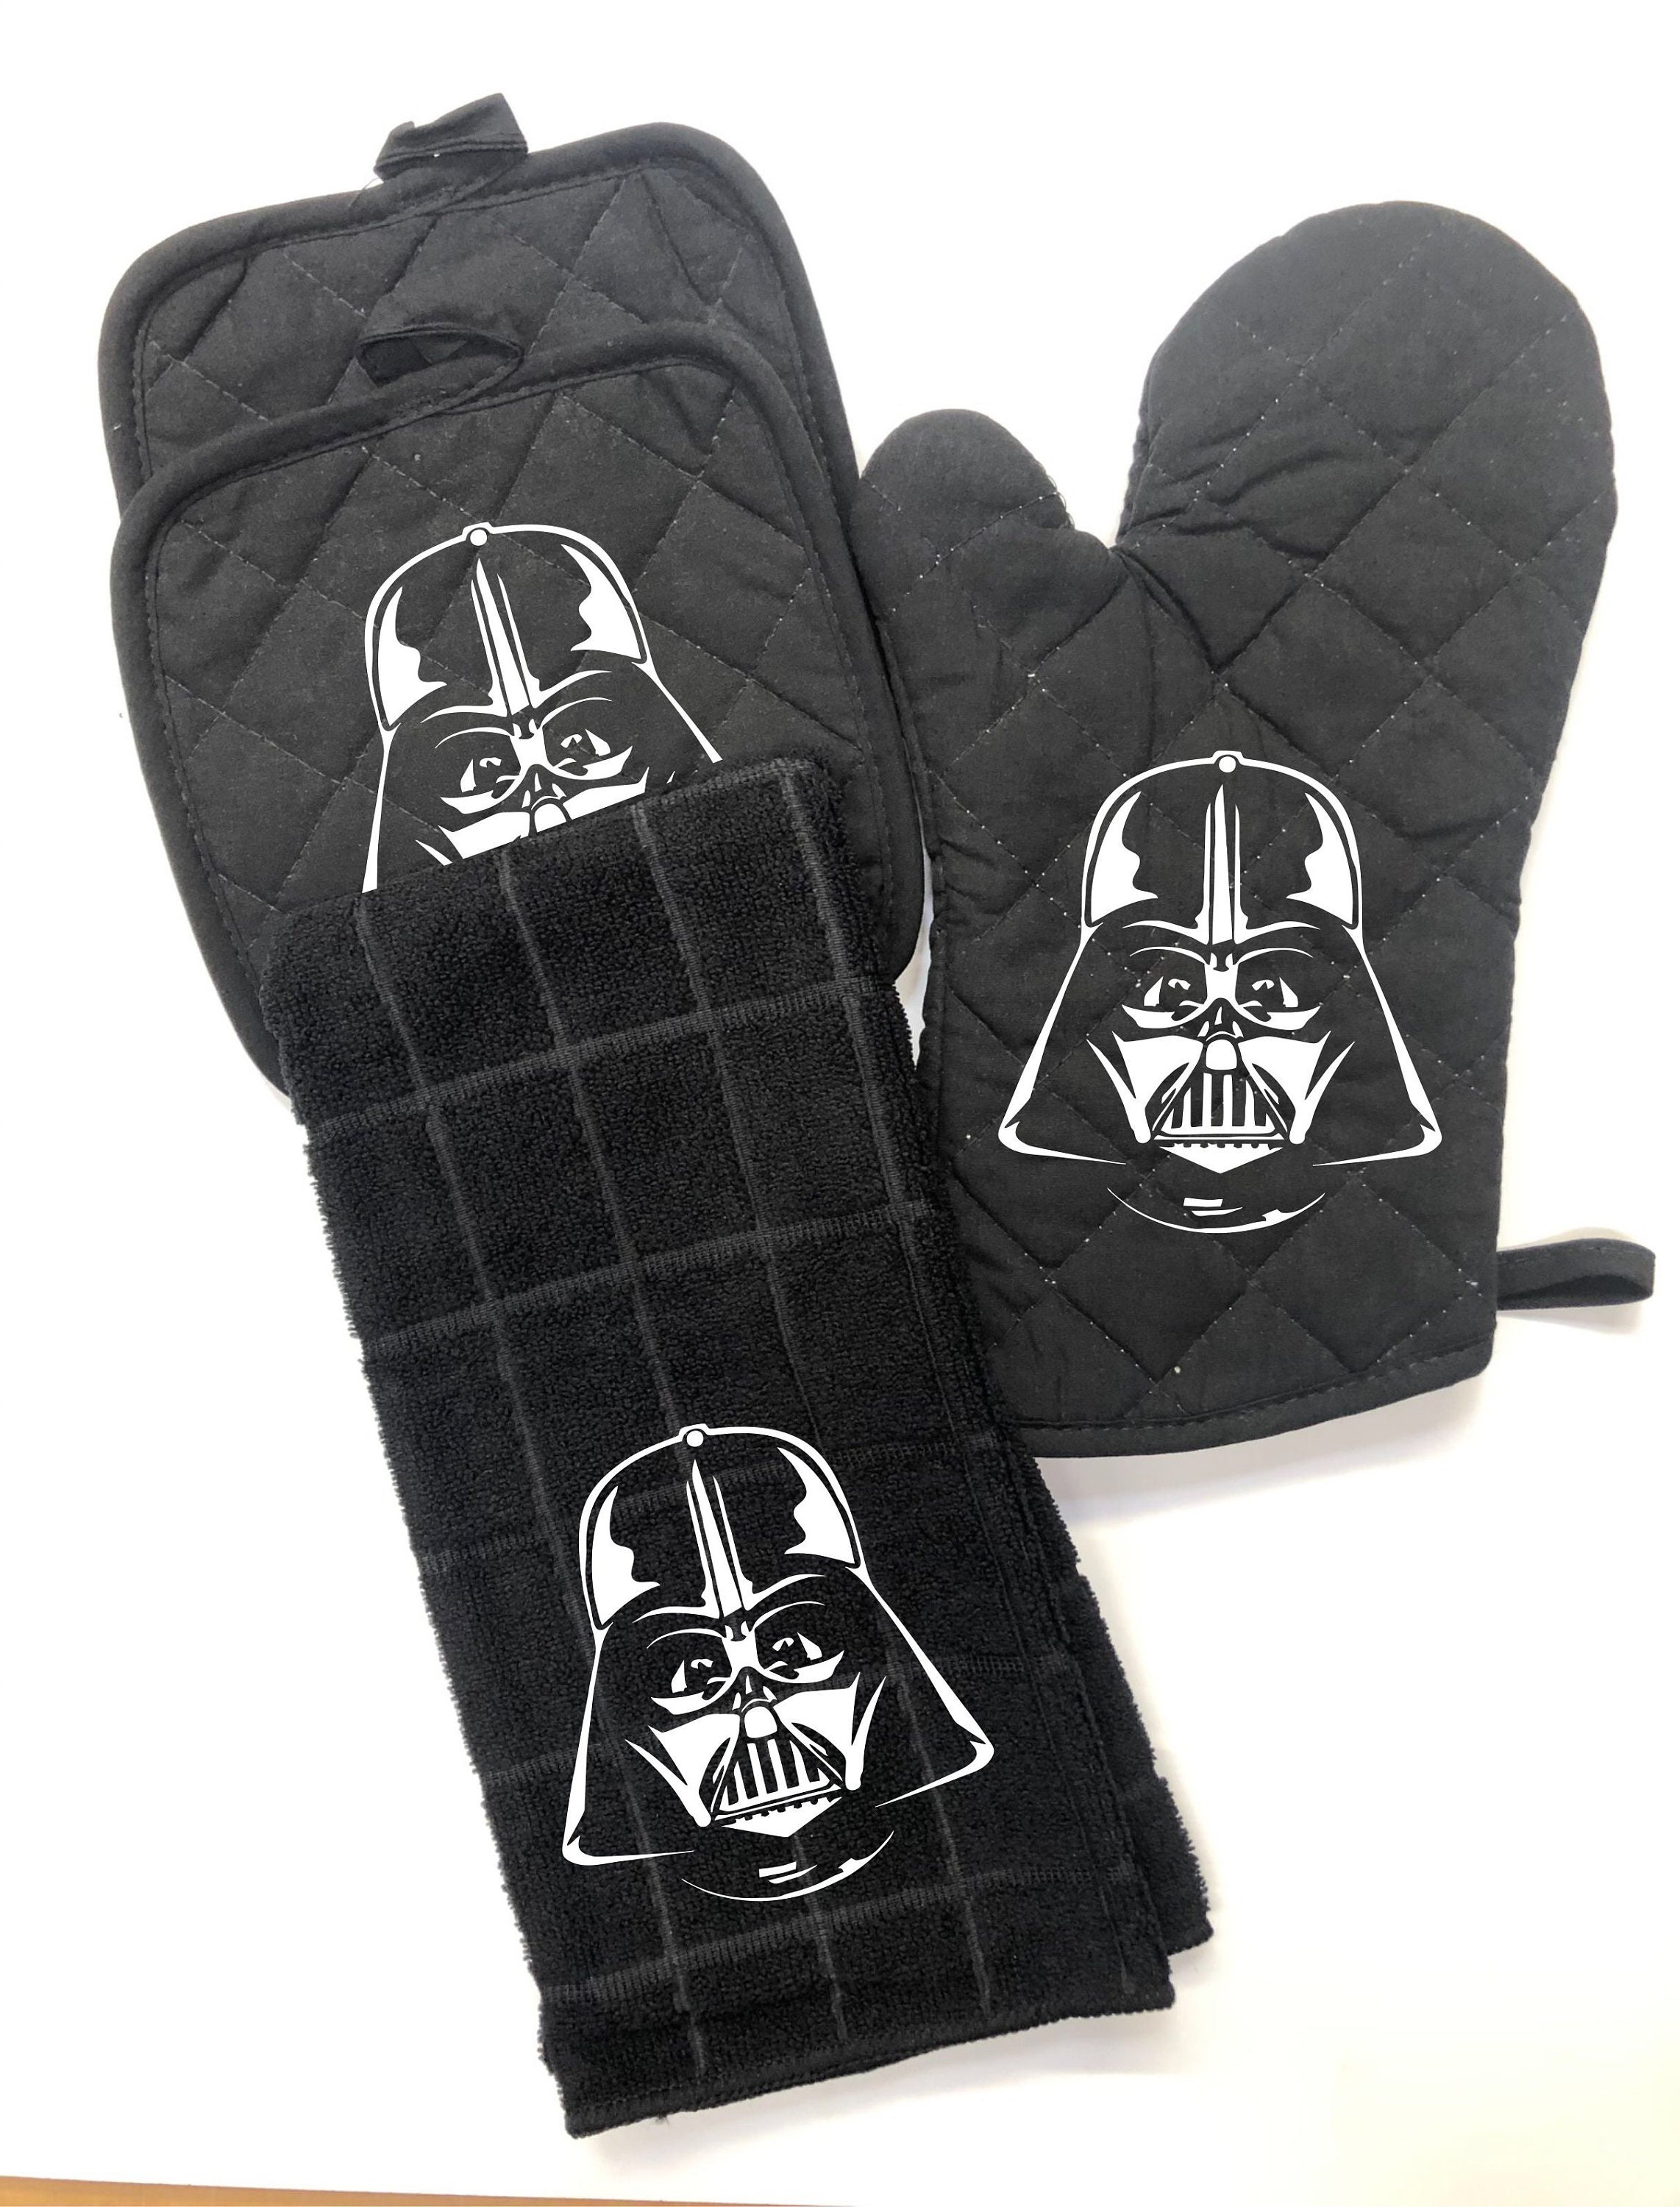 Darth Vader and Stormtrooper-Themed Silicon Oven Mitts — GeekTyrant